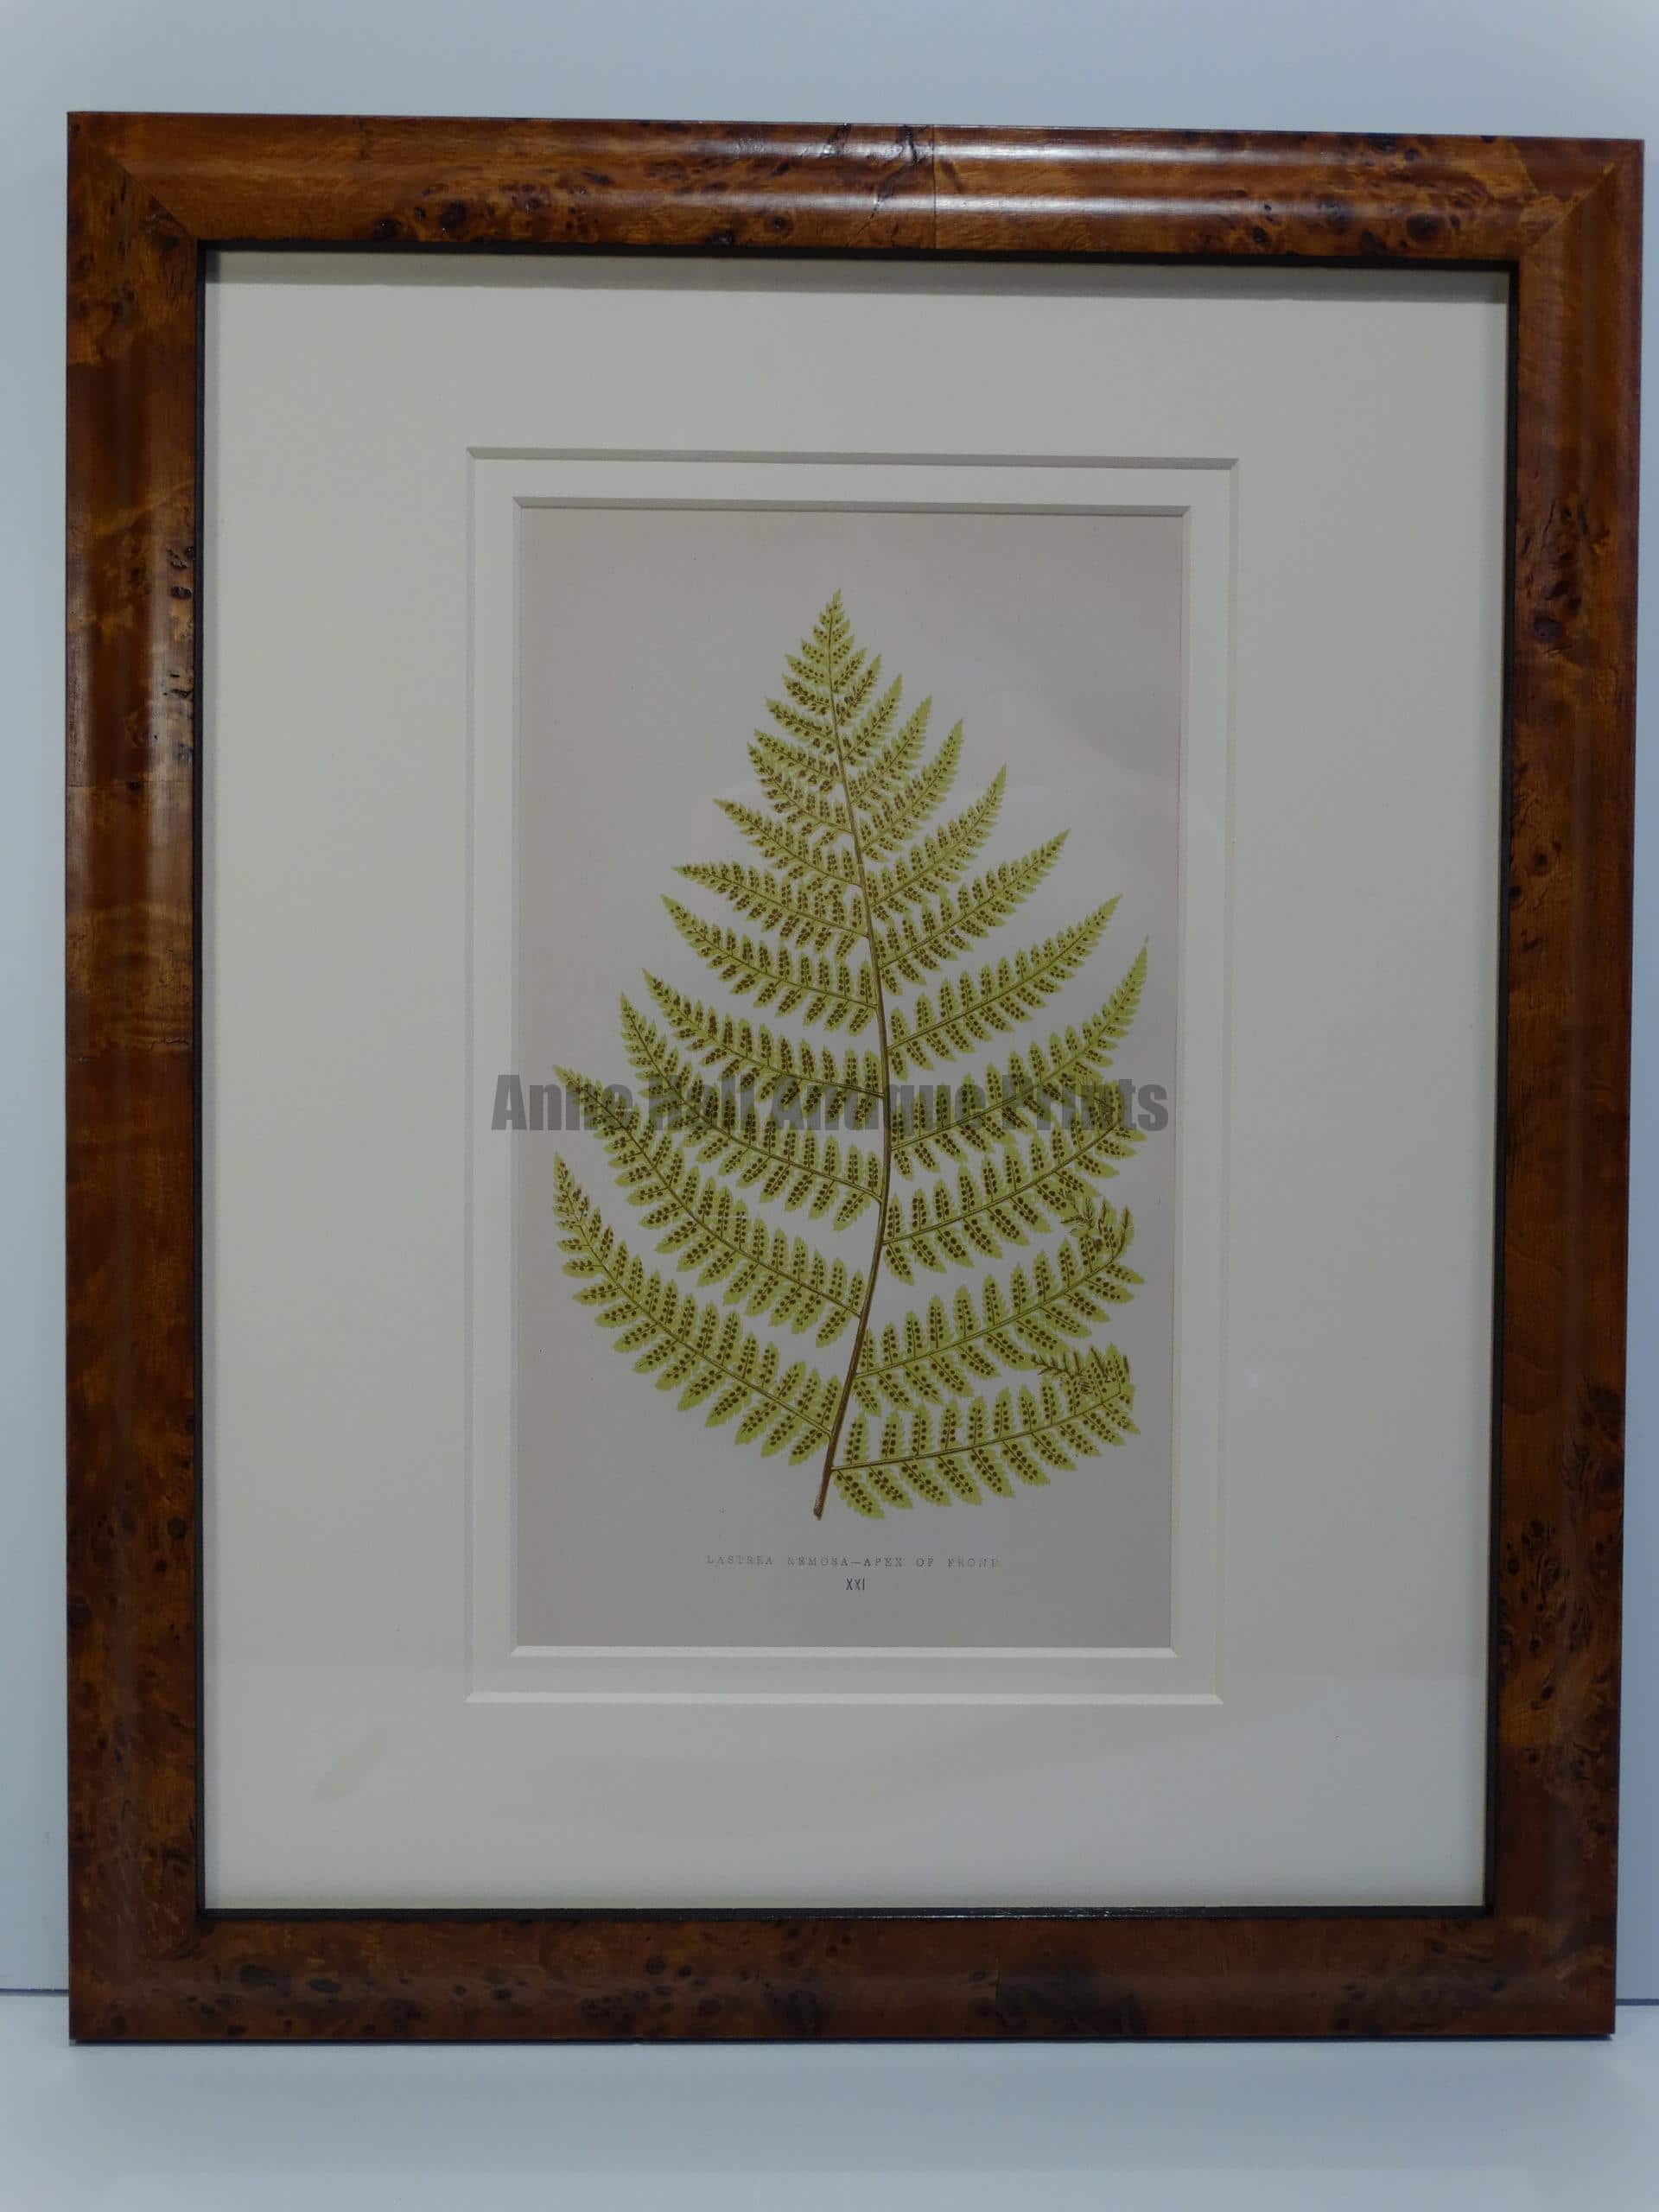 fern lithograph from the 19th century